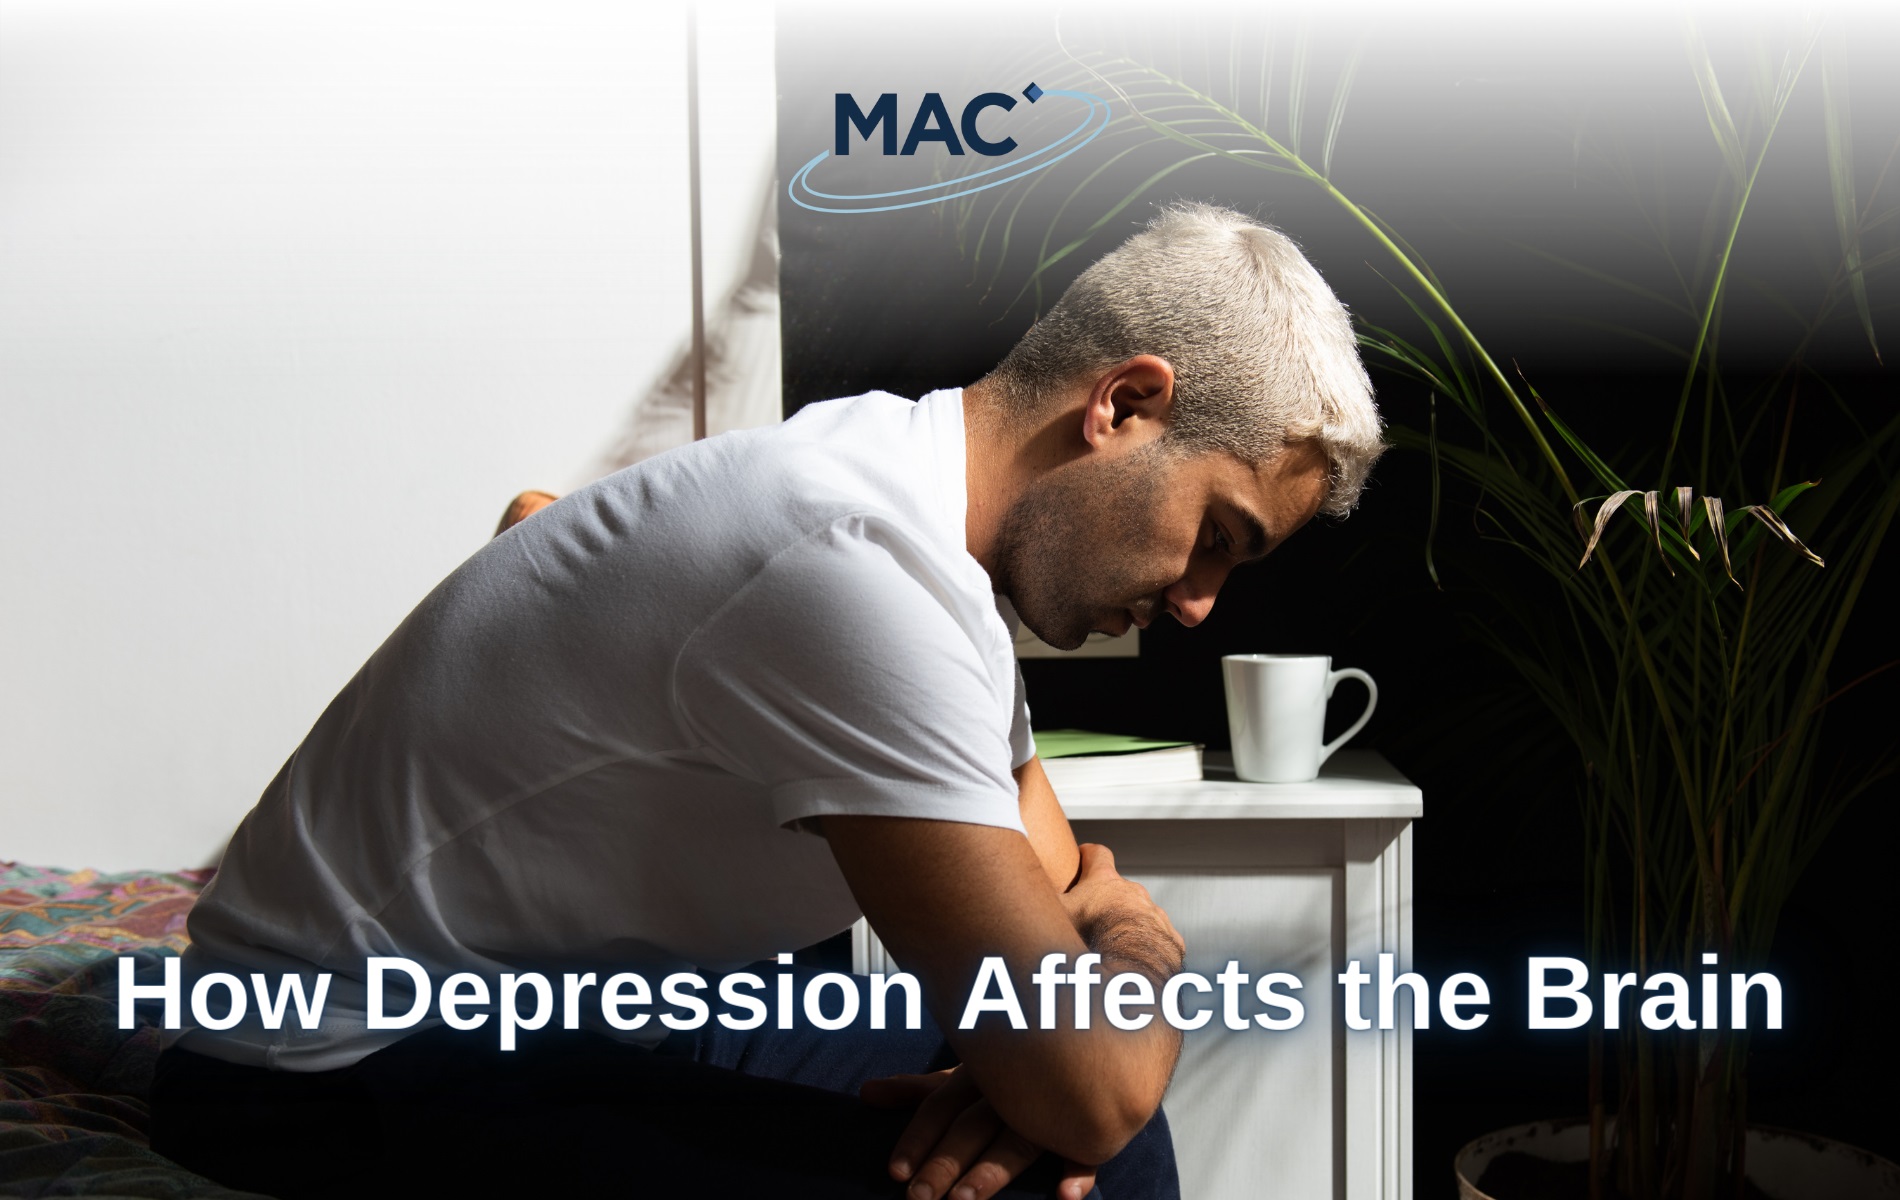 How depression affects the brain